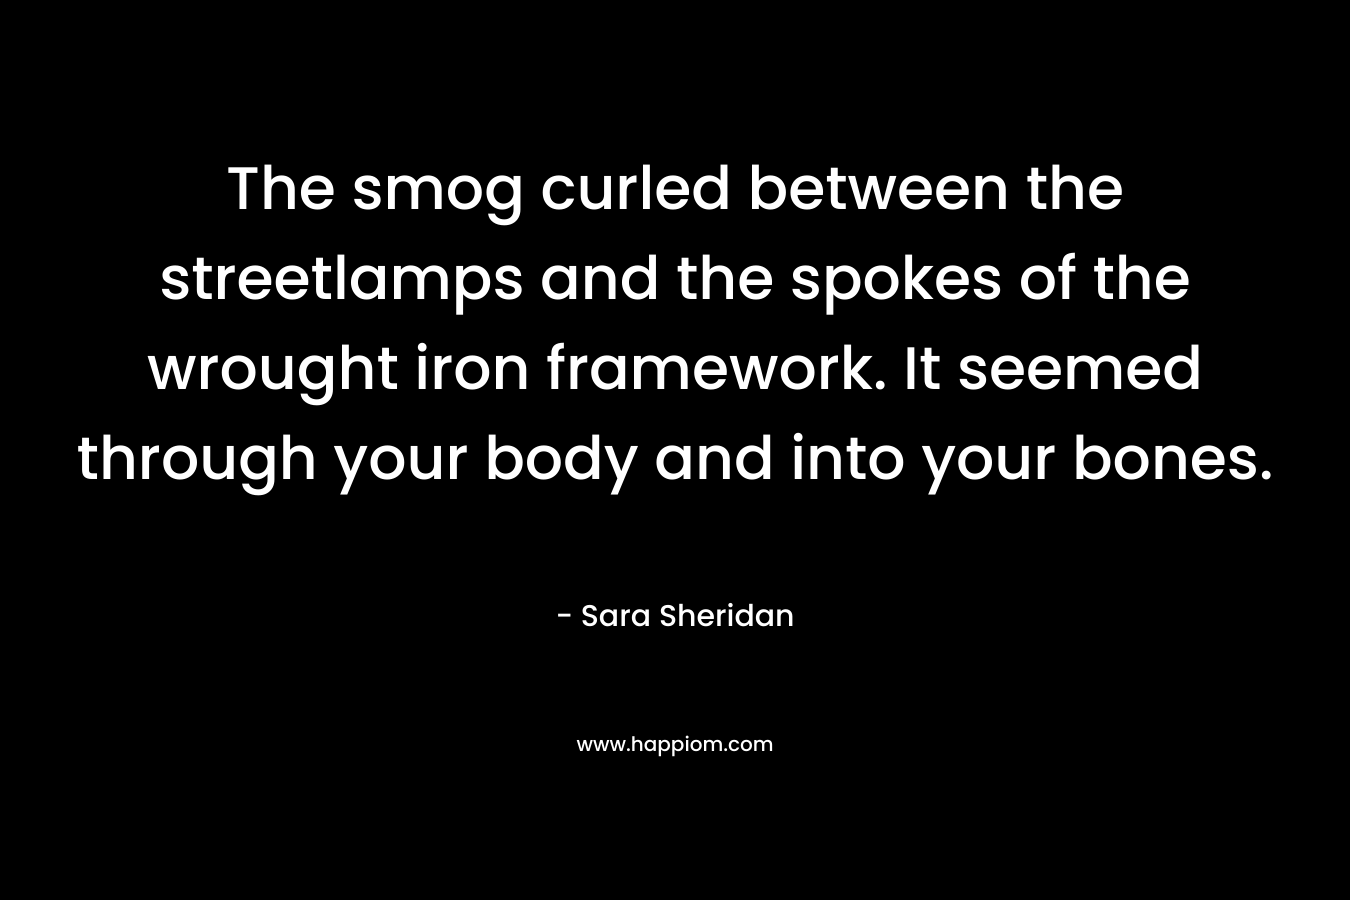 The smog curled between the streetlamps and the spokes of the wrought iron framework. It seemed through your body and into your bones. – Sara Sheridan